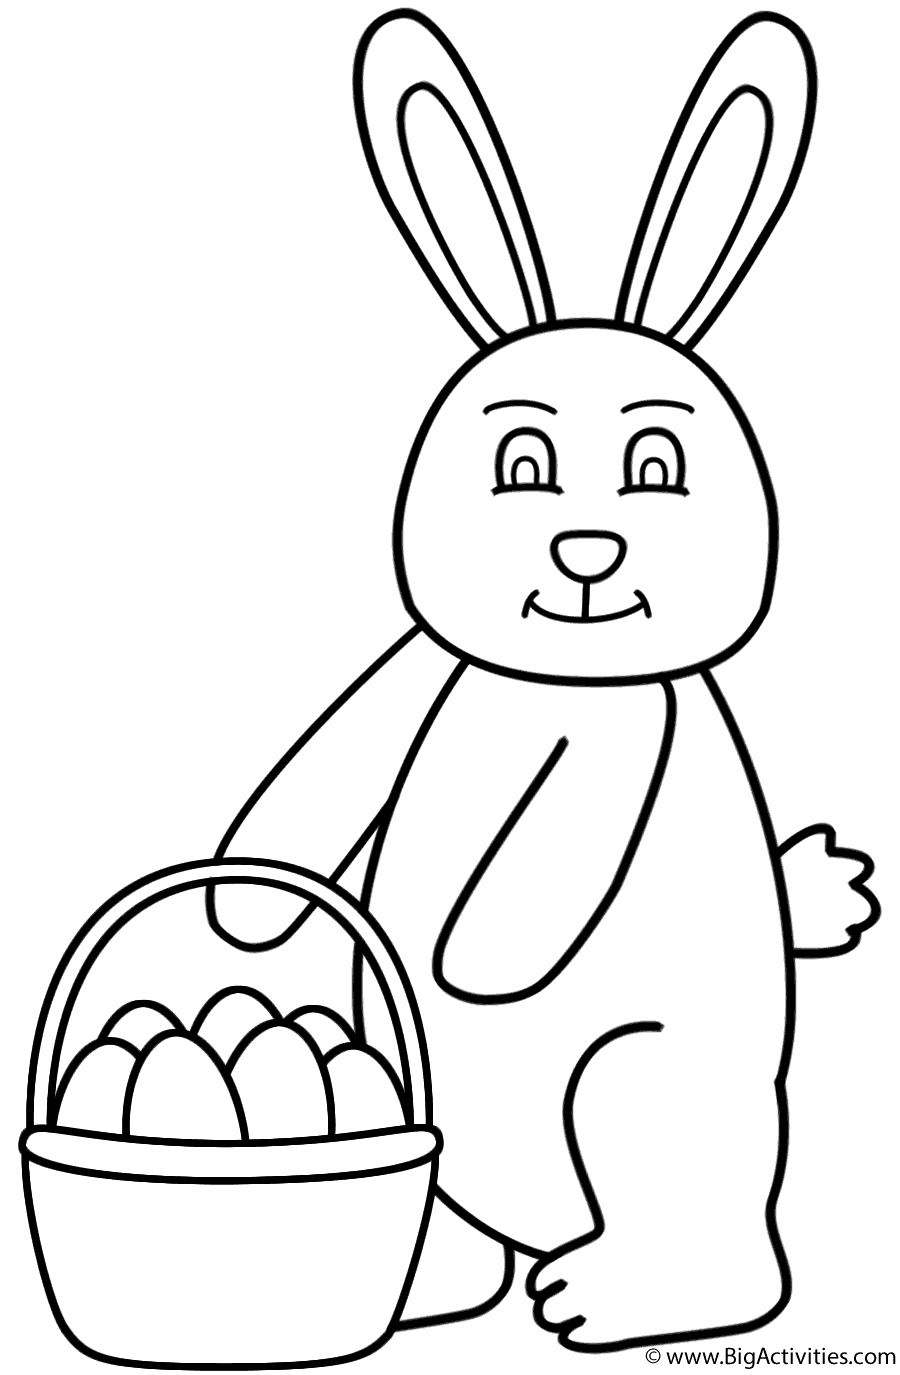 Easter Bunny holding Basket of Eggs - Coloring Page (Easter)